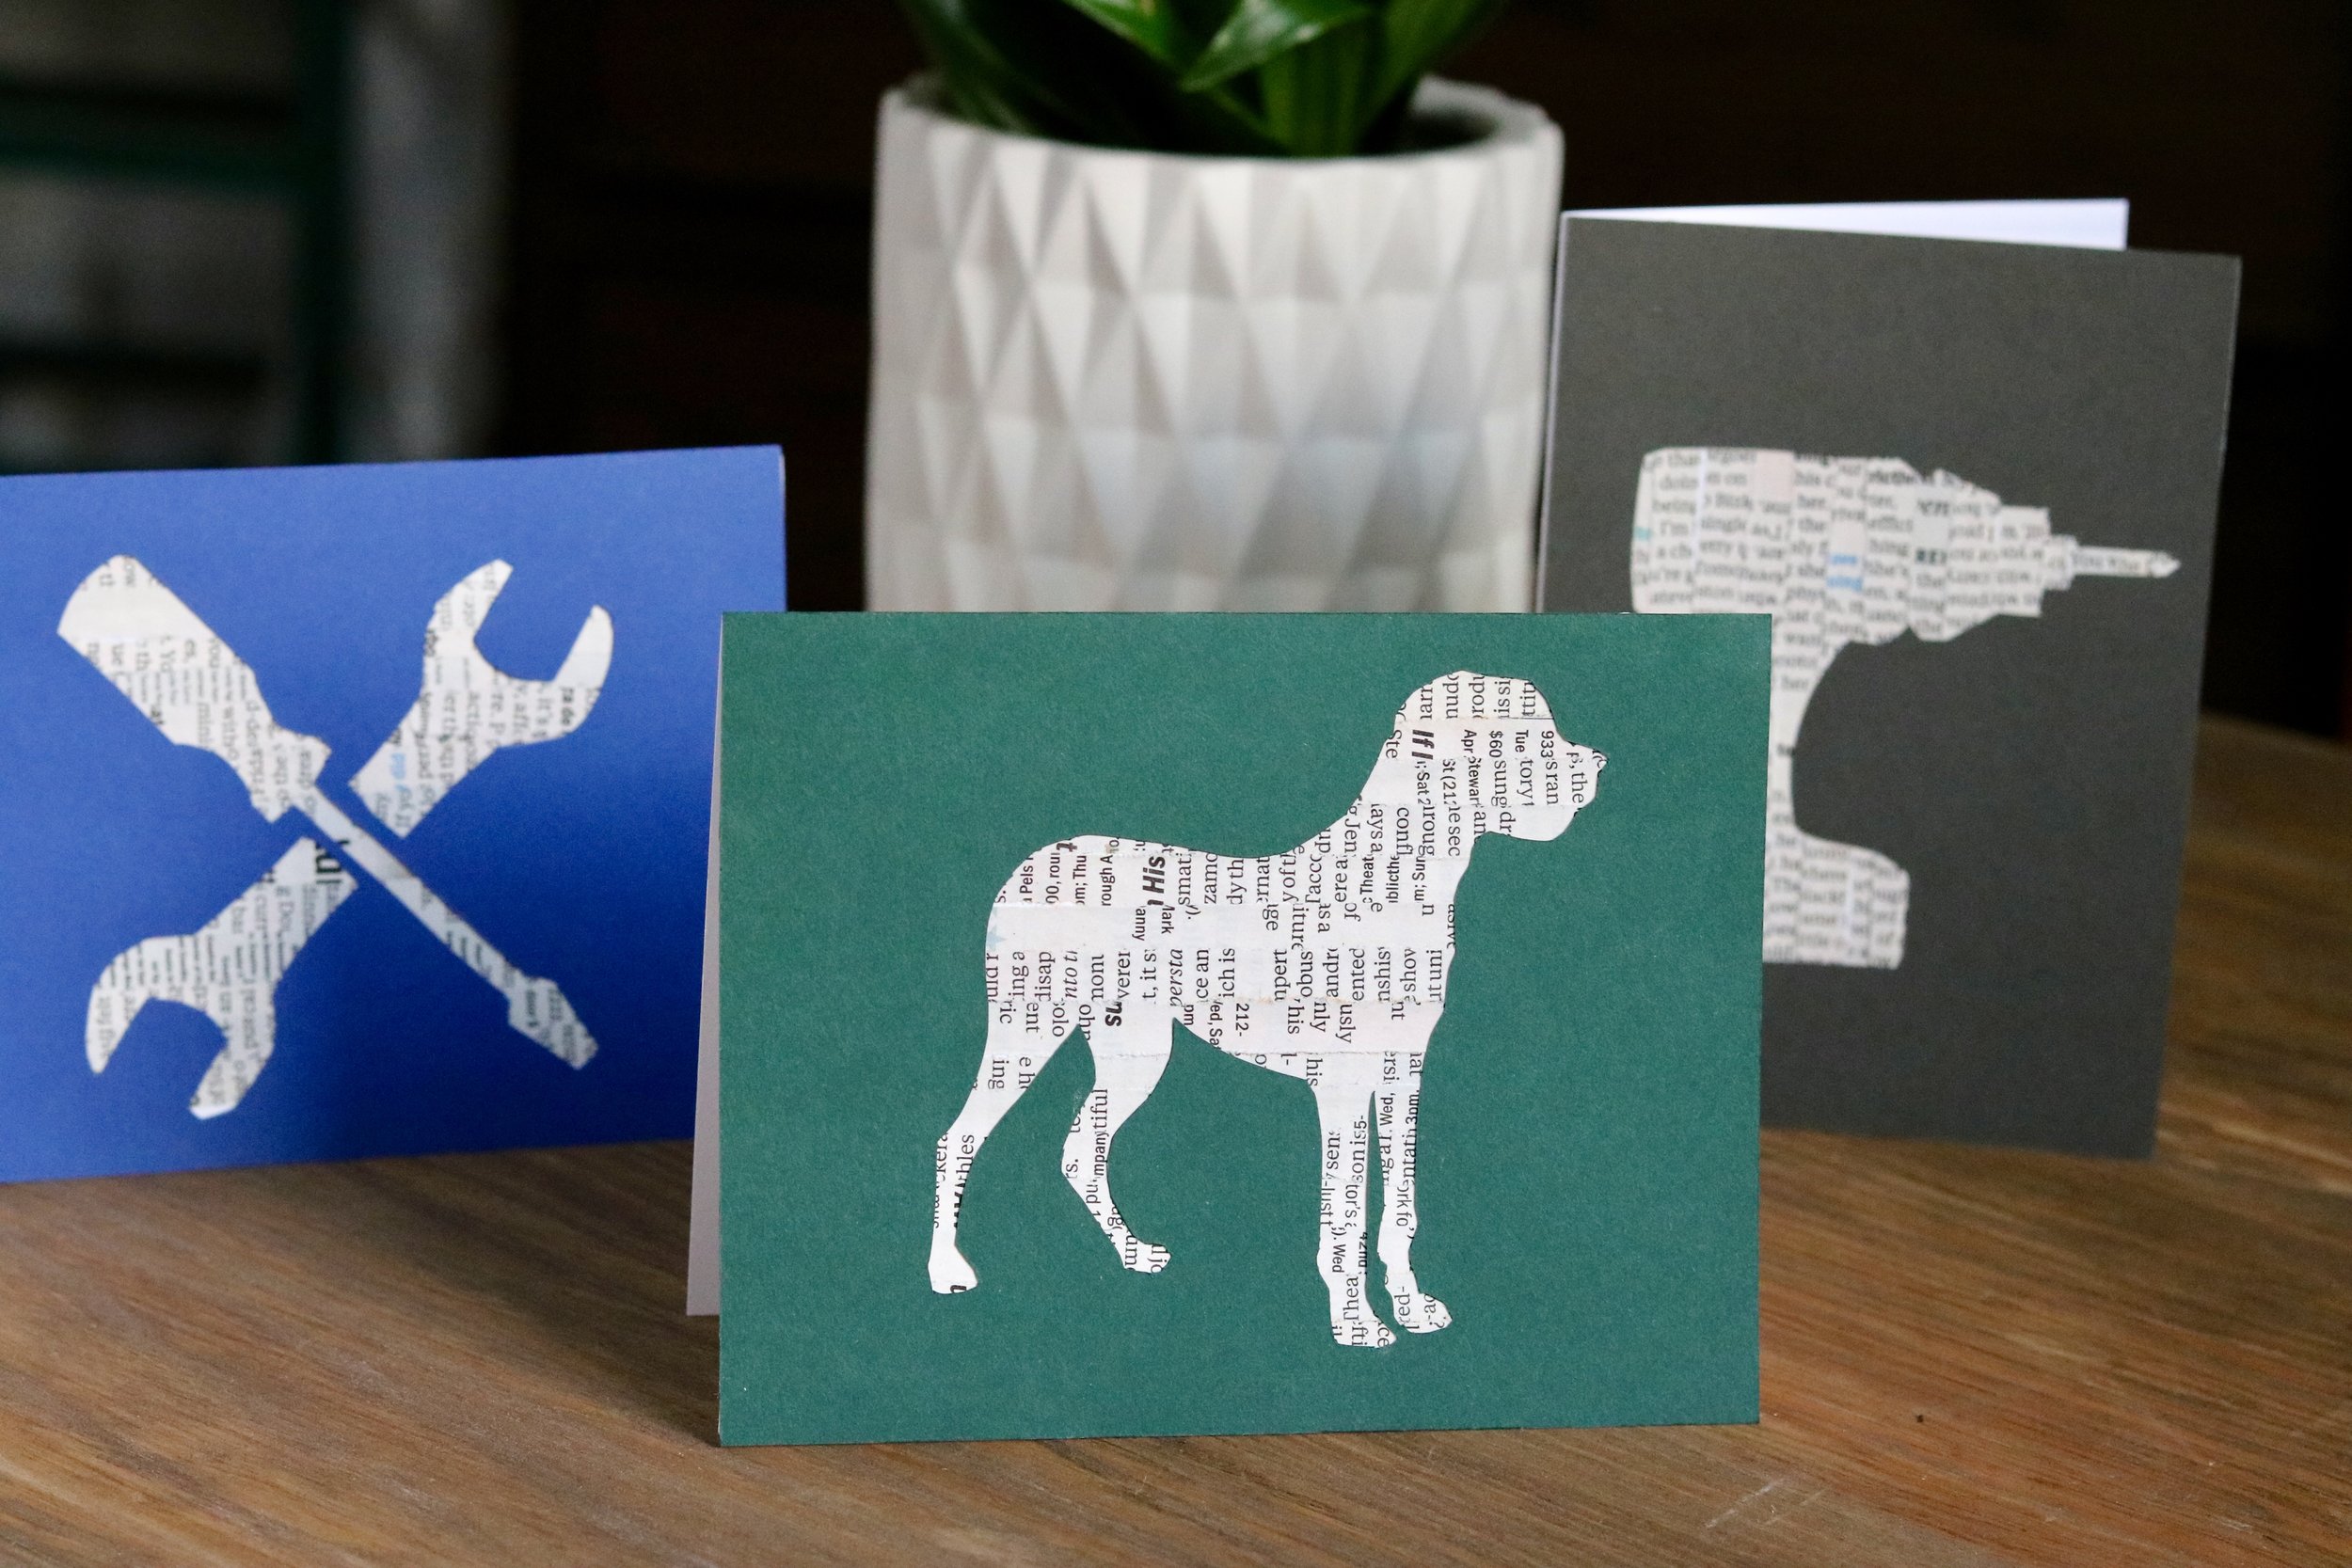 DIY Father's Day Cards #handmadegifts #handmadecards #cards #fathersday #fathersdayideas #fathersdayideas #cardsformen #giftsformen #diycards #papercrafts #paperart